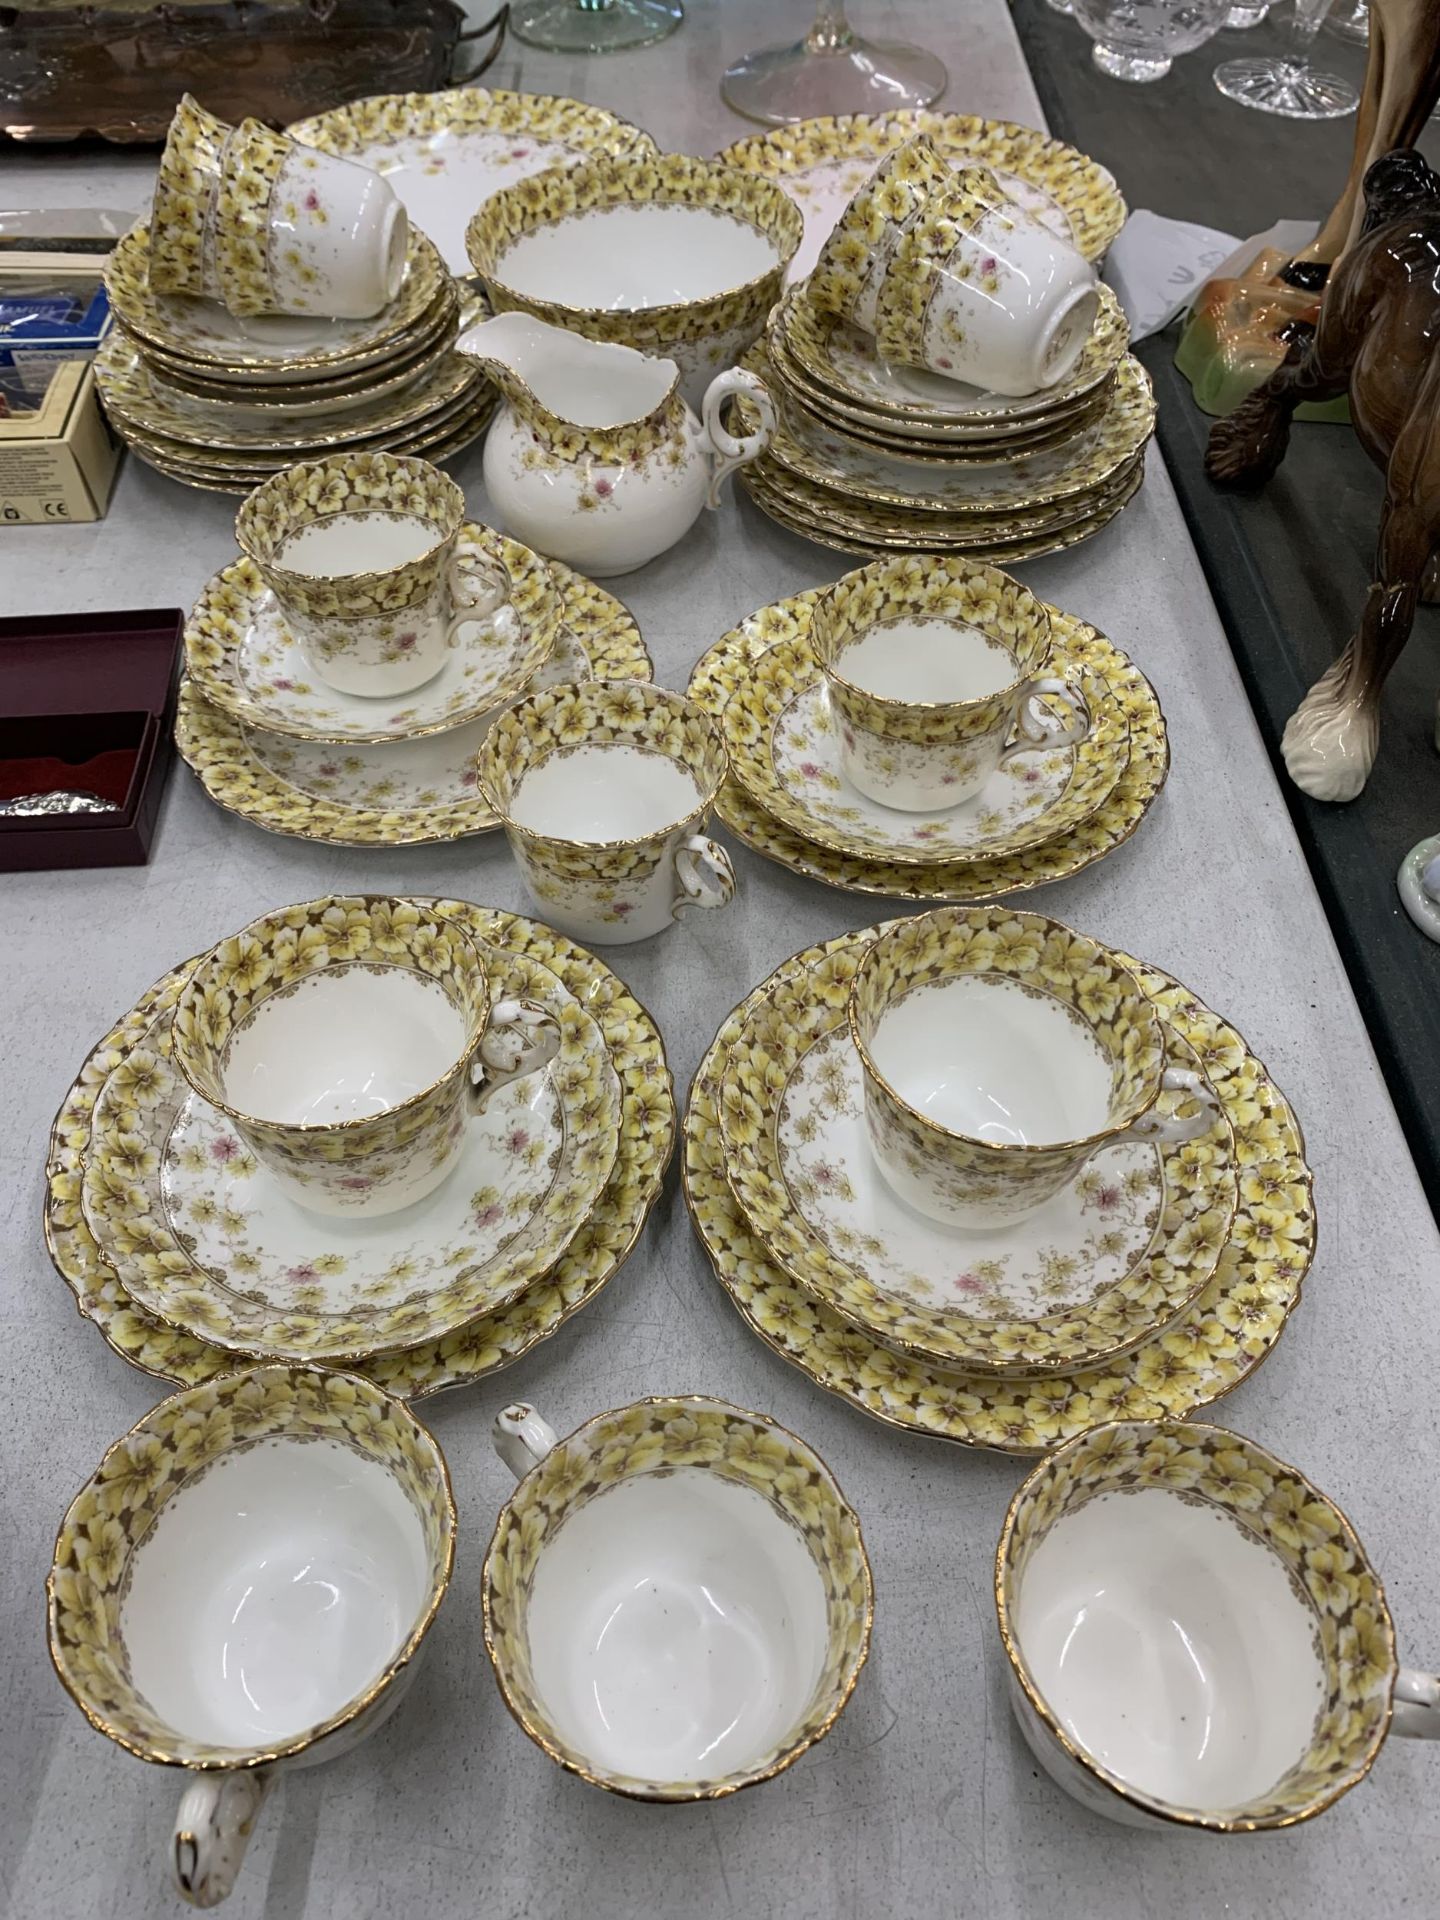 A VINTAGE CHAPMAN CHINA TEASET TO INCLUDE CUPS, SAUCERS, SIDE PLATES, CAKE PLATES A CREAM JUG AND